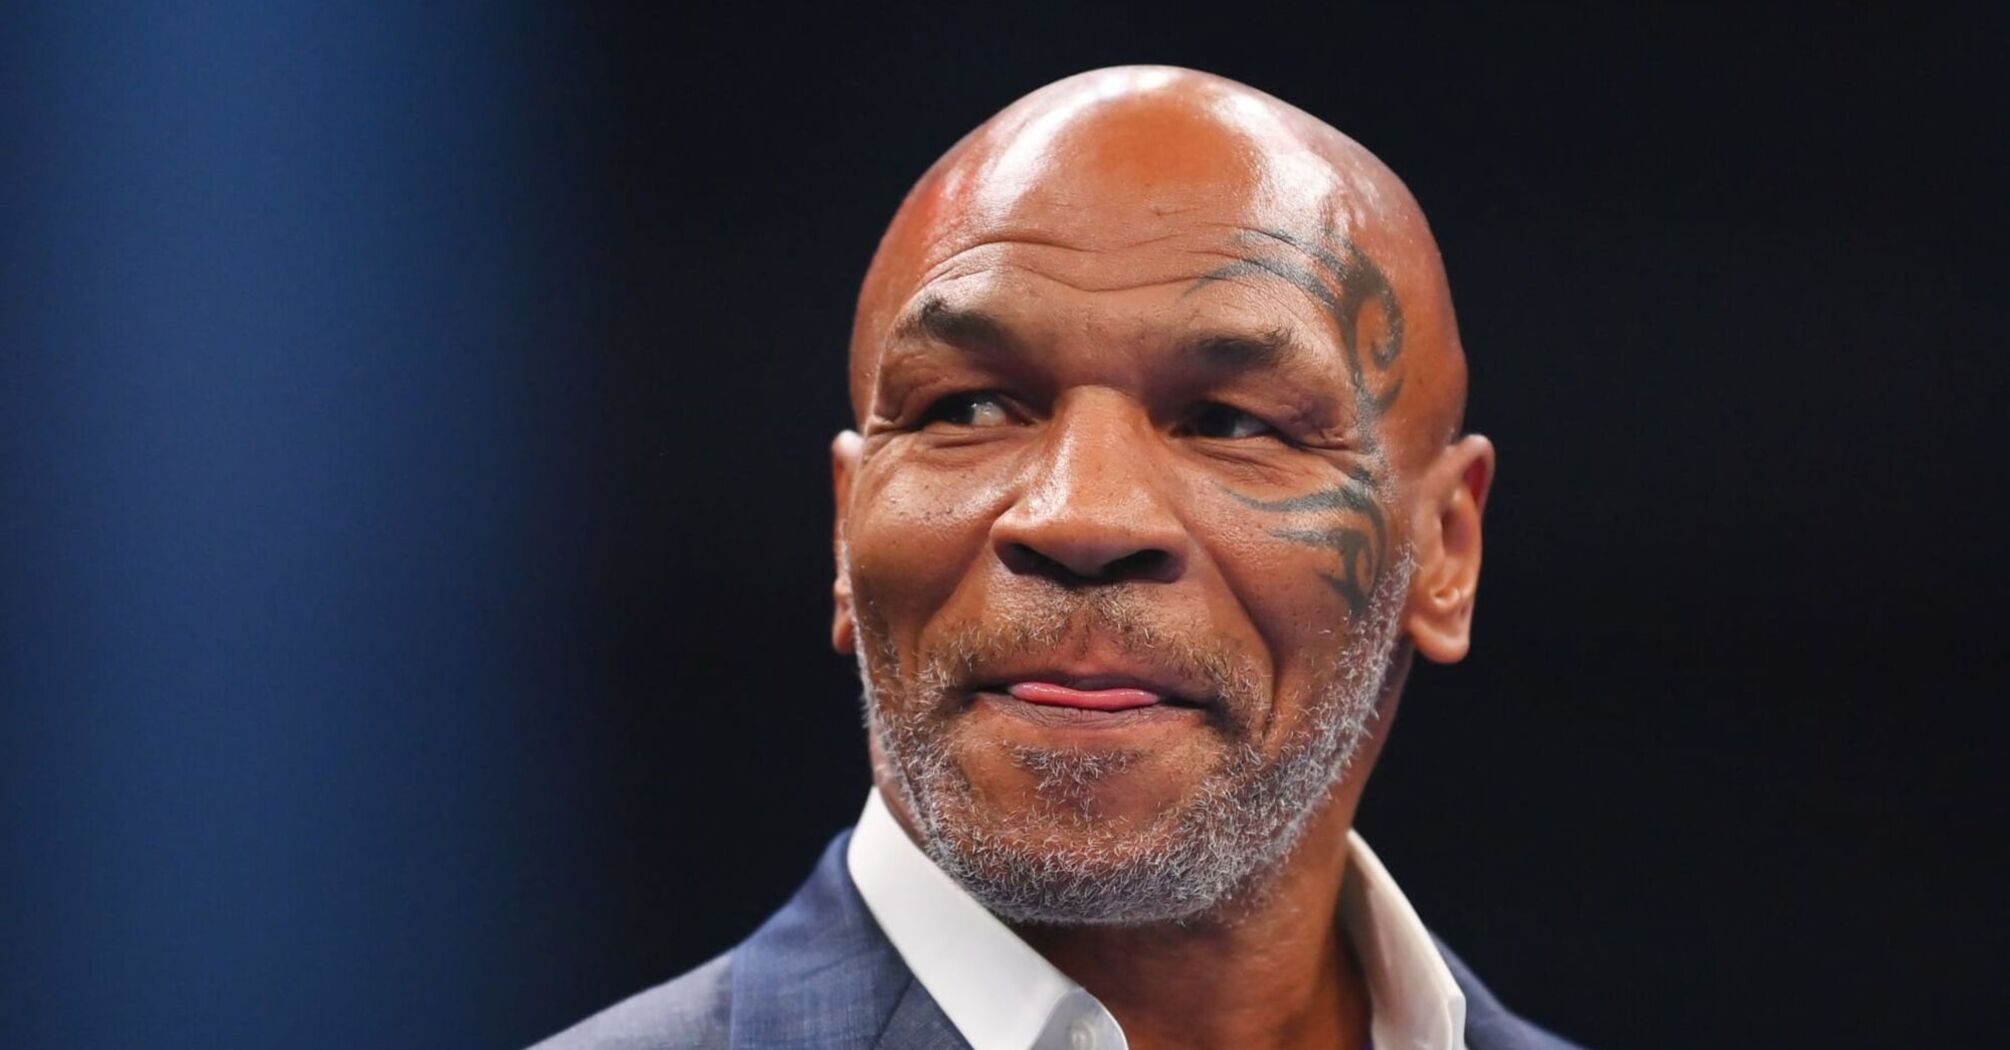 Legendary Mike Tyson will fight with YouTube star